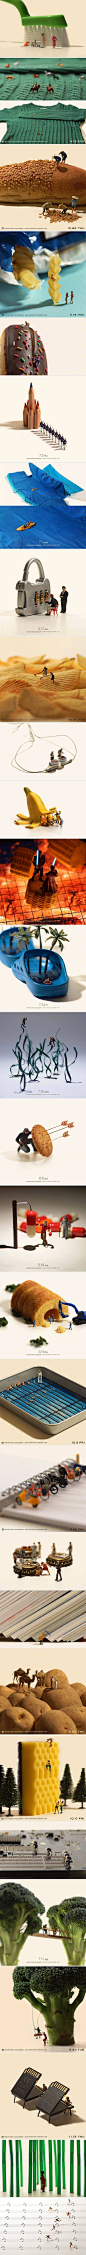 Tiny figurines interacting with everyday objects in interesting ways (By Miniature Calendar)